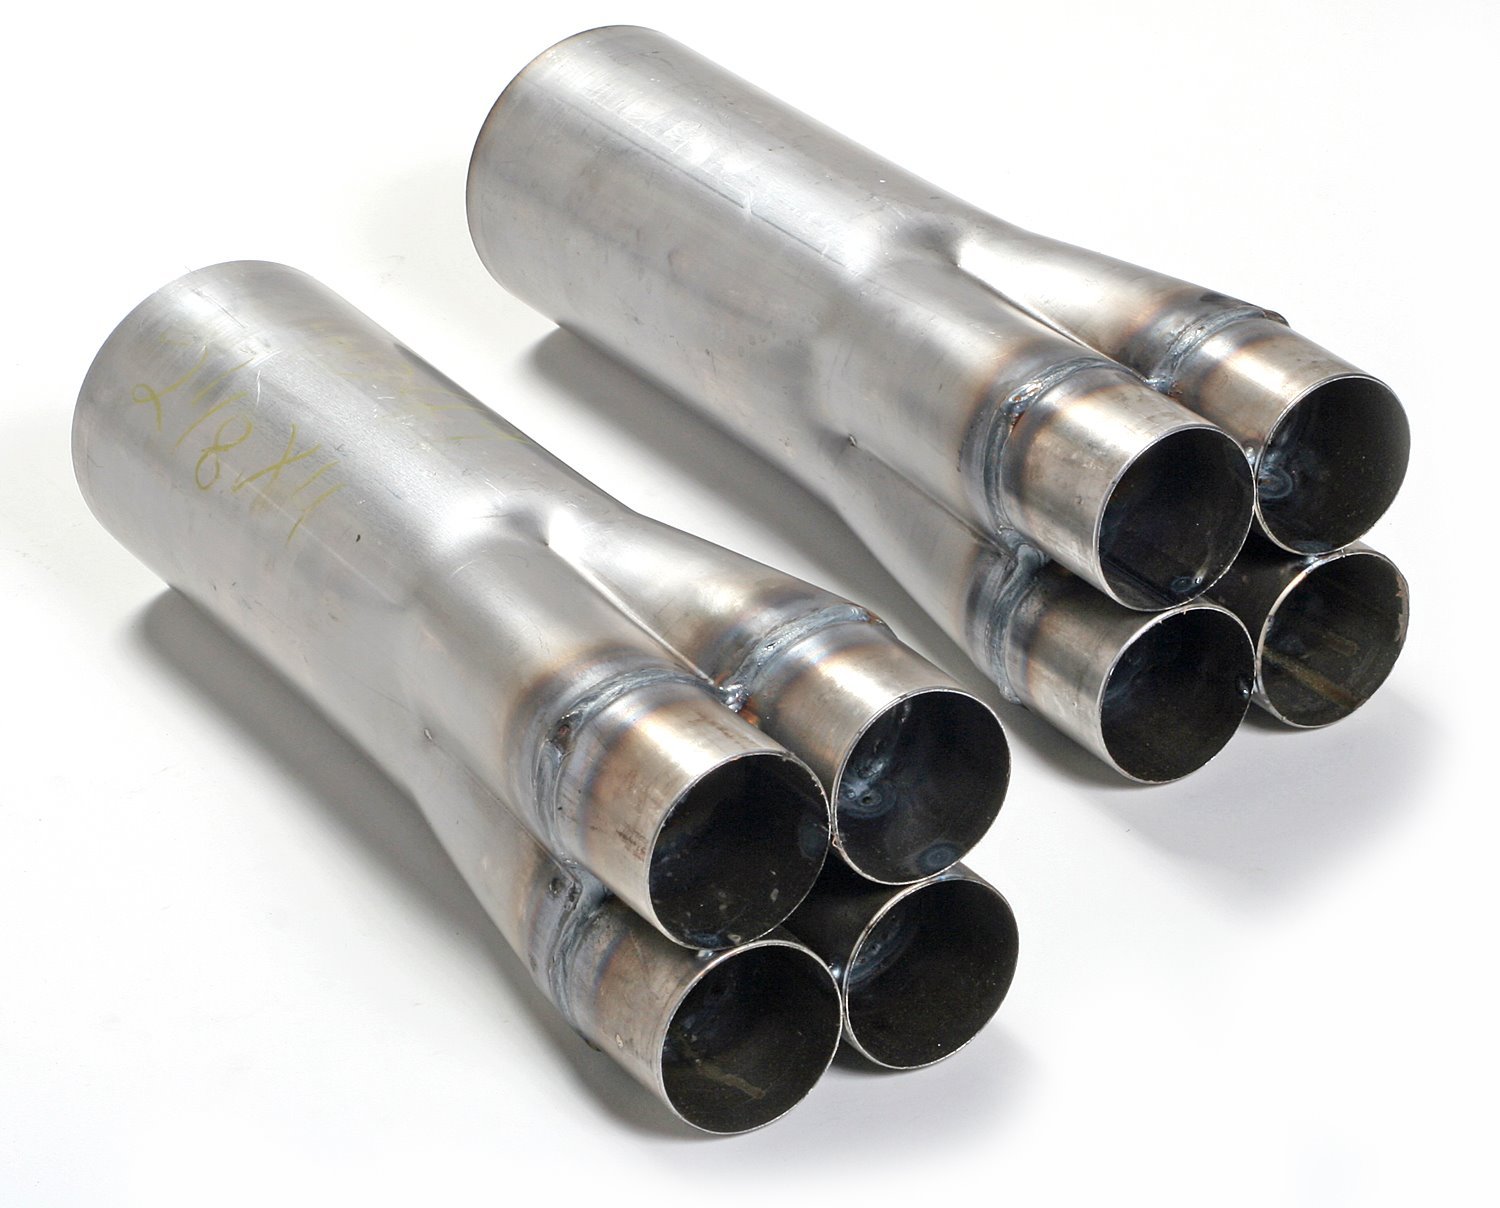 Slip-On Collector Tube Size: 1-3/4"